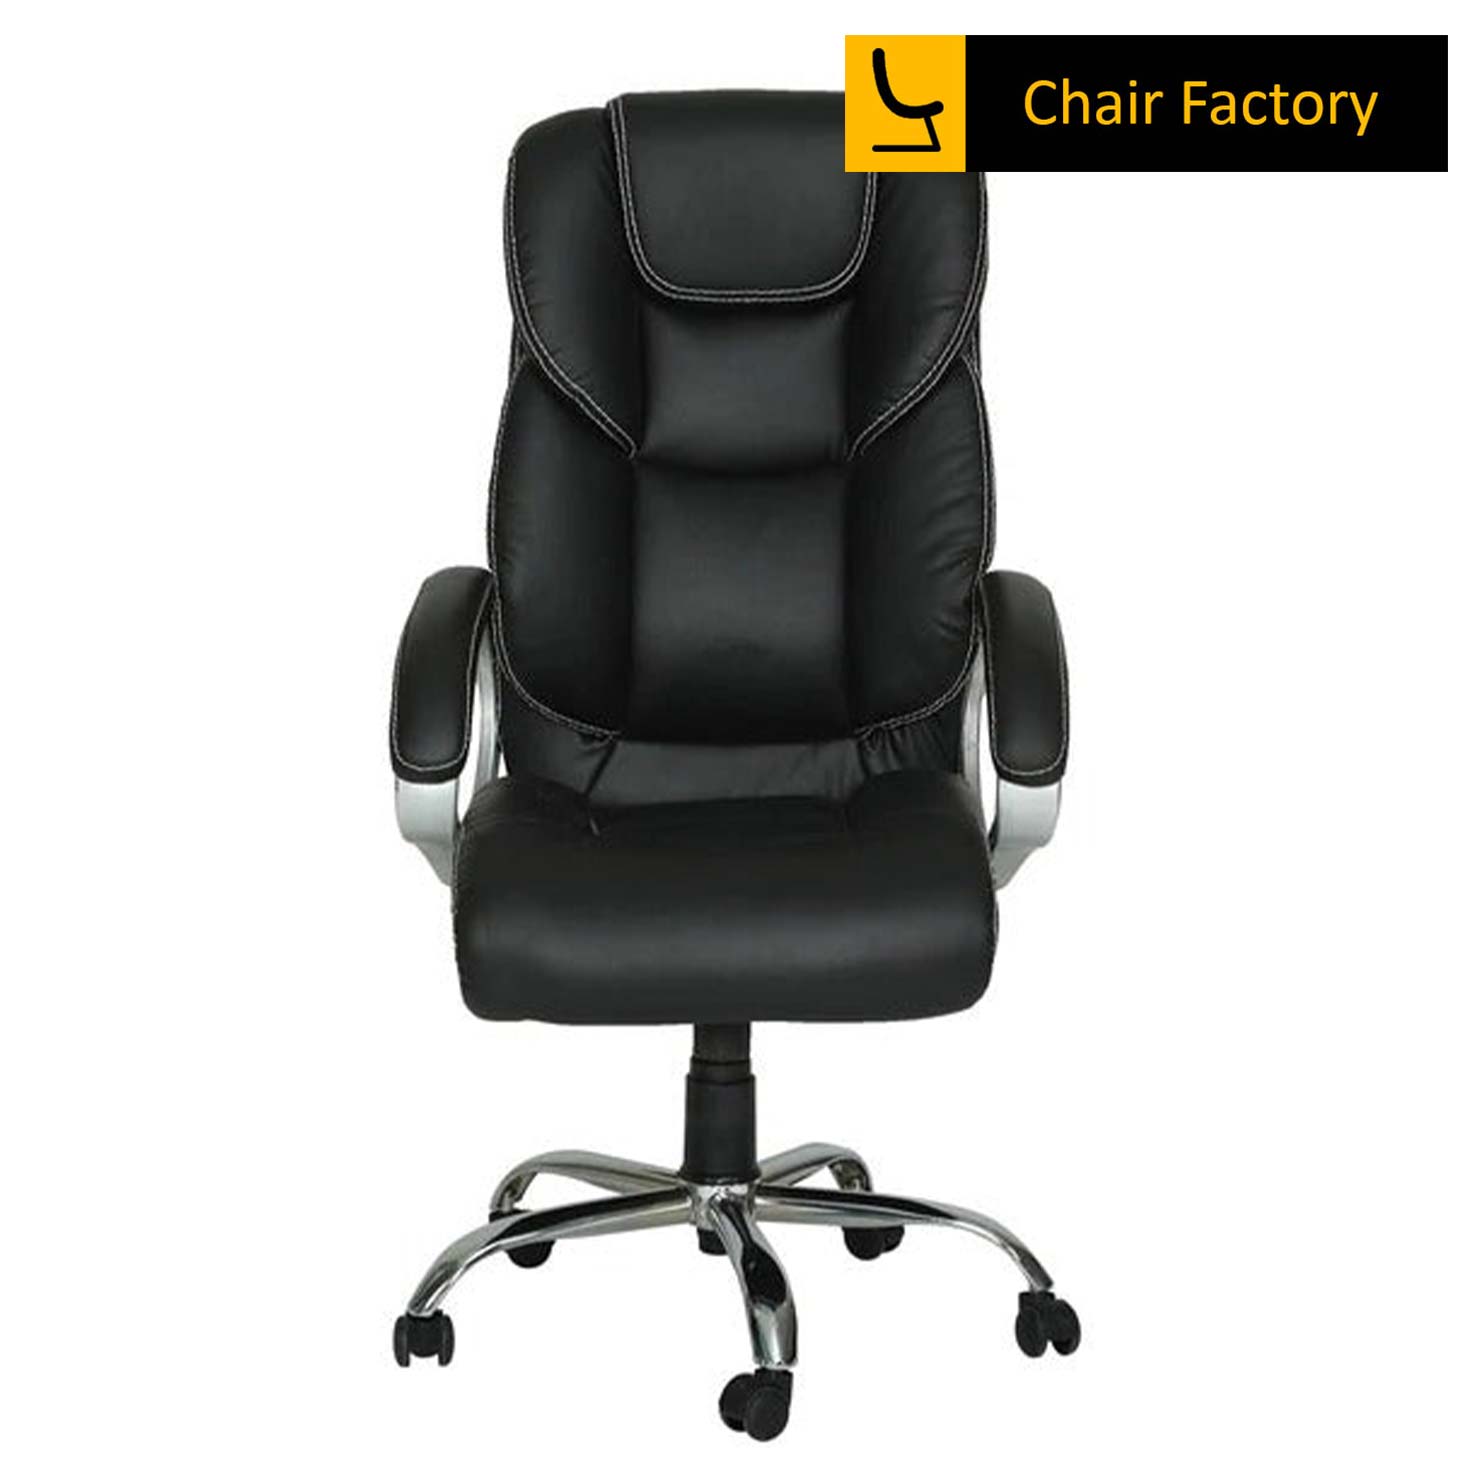 Saigon High Back comfort back rest Leather Chair Chair Factory